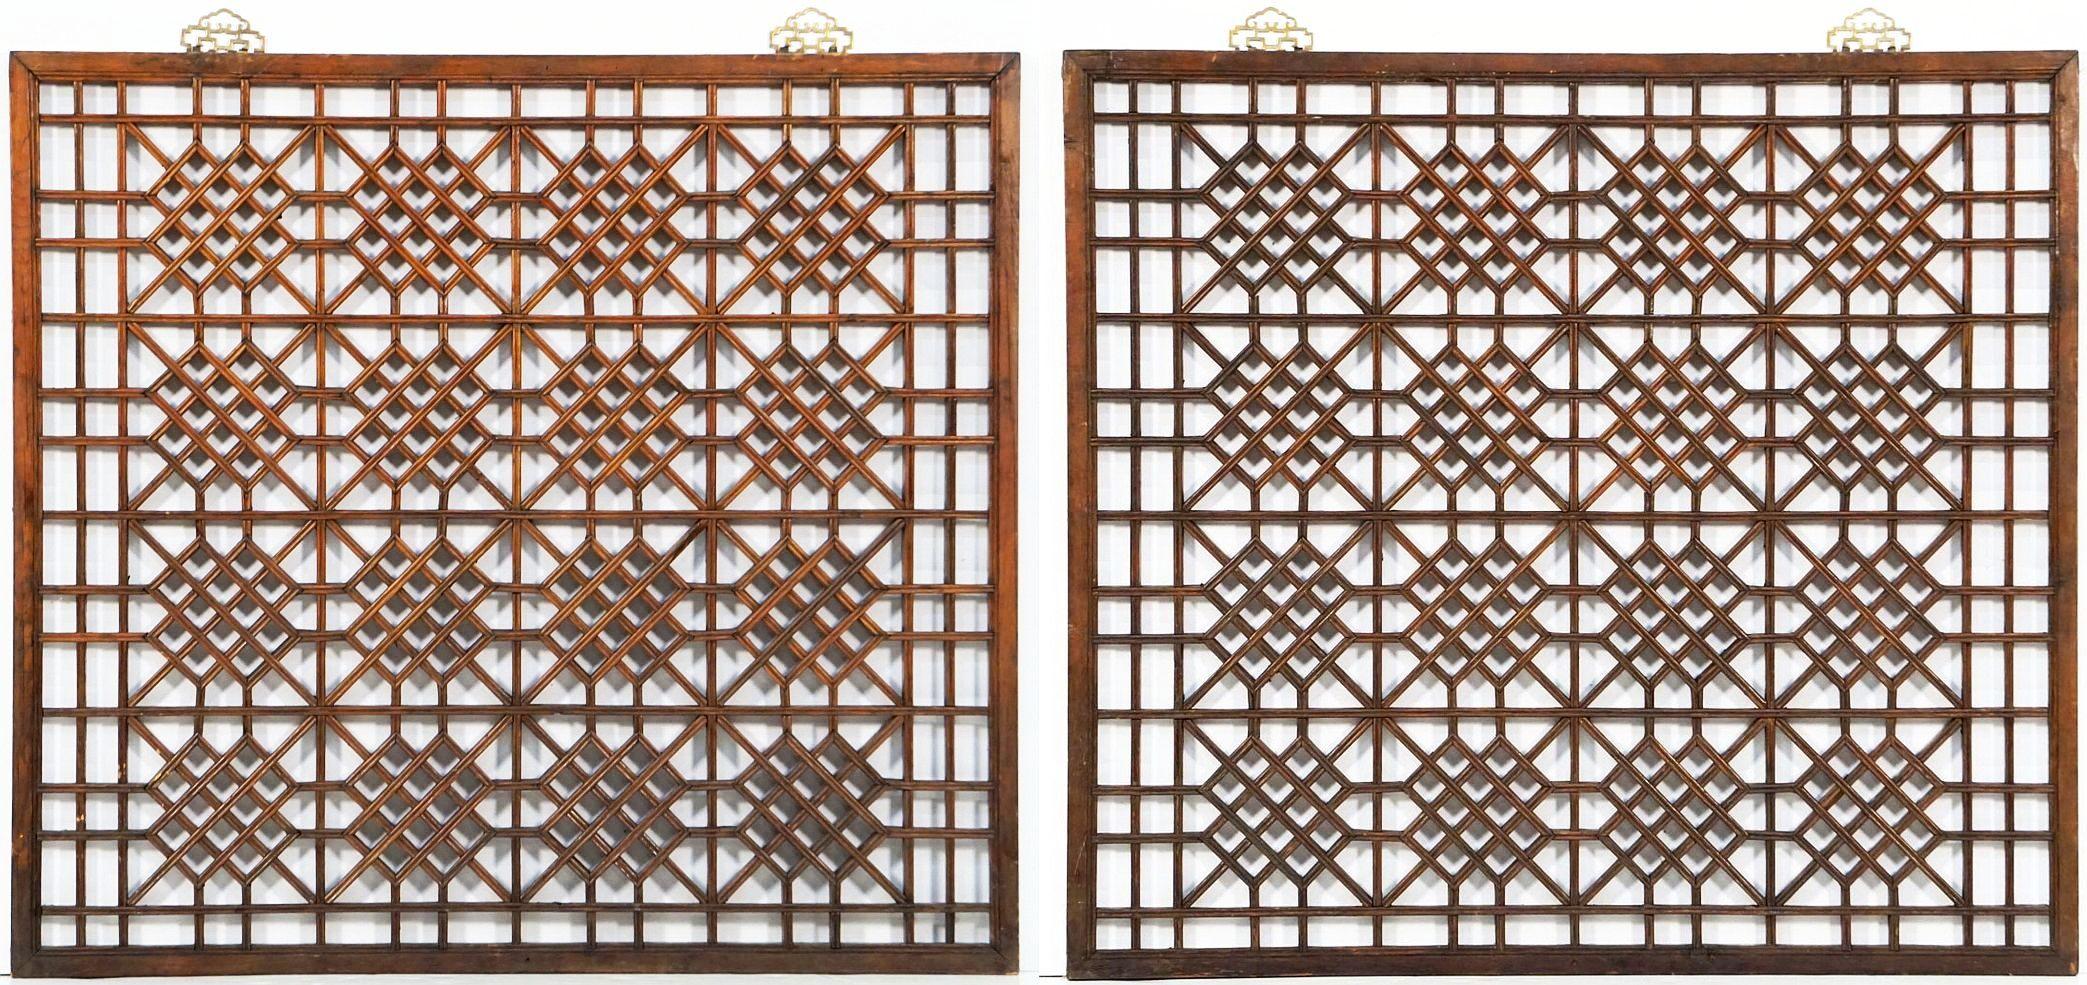 A fine set of Chinese decorative lattice-work wood panels or window screens of patinated pine from the early 20th century - each panel featuring an open geometric lattice pattern design of individual wood segments in a square frame with a light